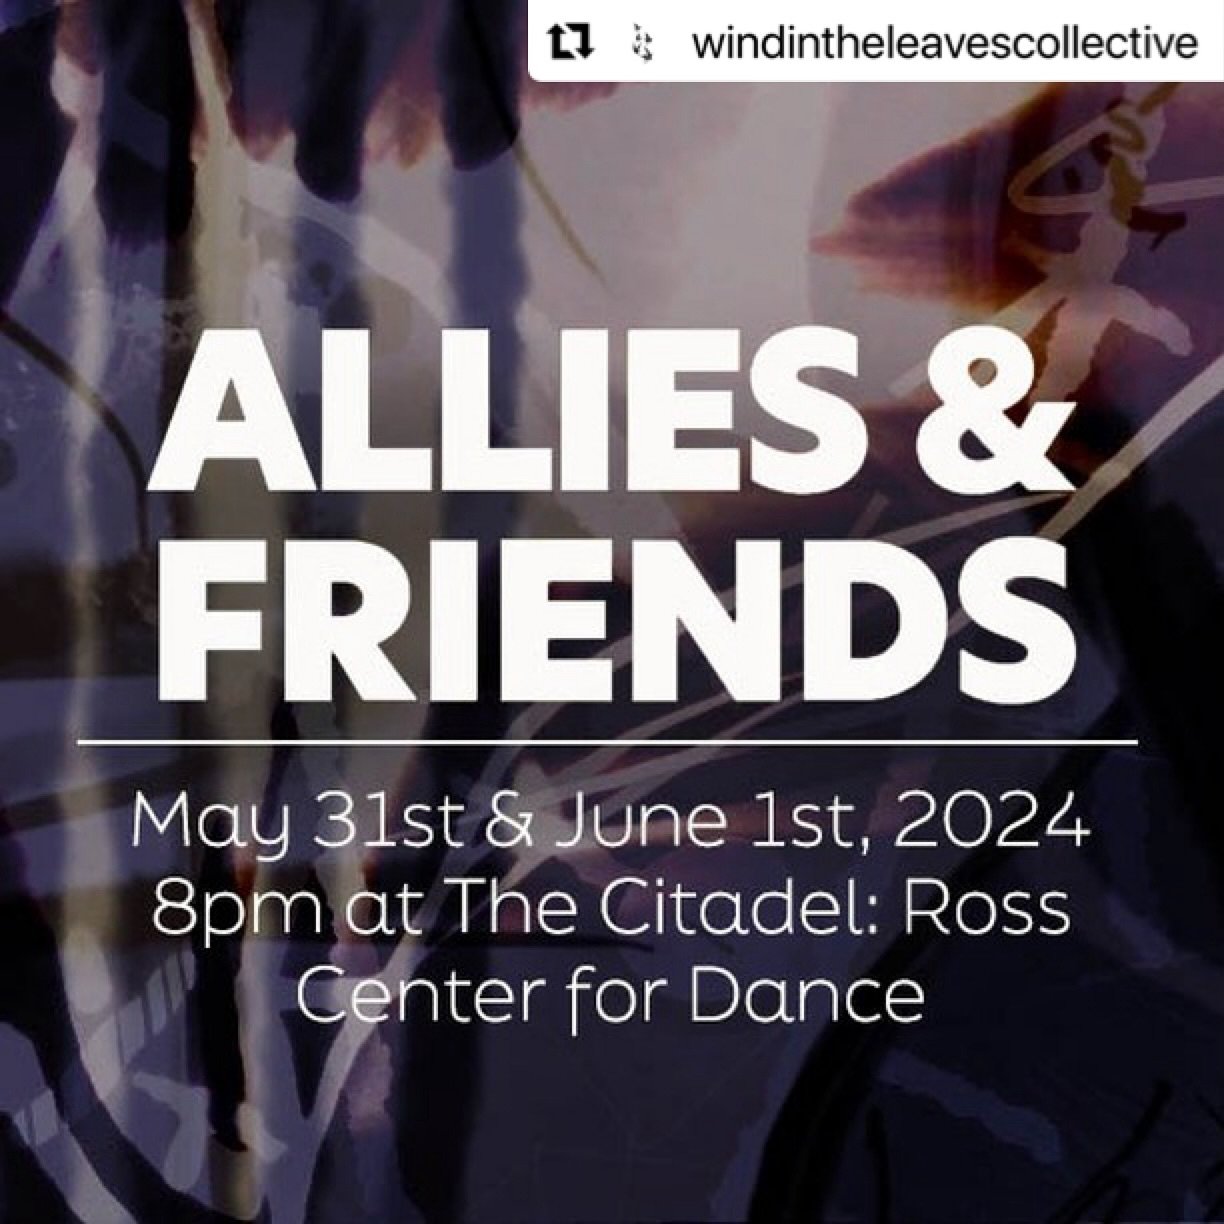 I&rsquo;m beyond excited to announce that I&rsquo;ll be performing my poetry alongside dancer @rajvidance at @windintheleavescollective Allies and Friends show, May 31st and June 1st at @citadelcie_ 🙌 

Get your tickets through @windintheleavescolle